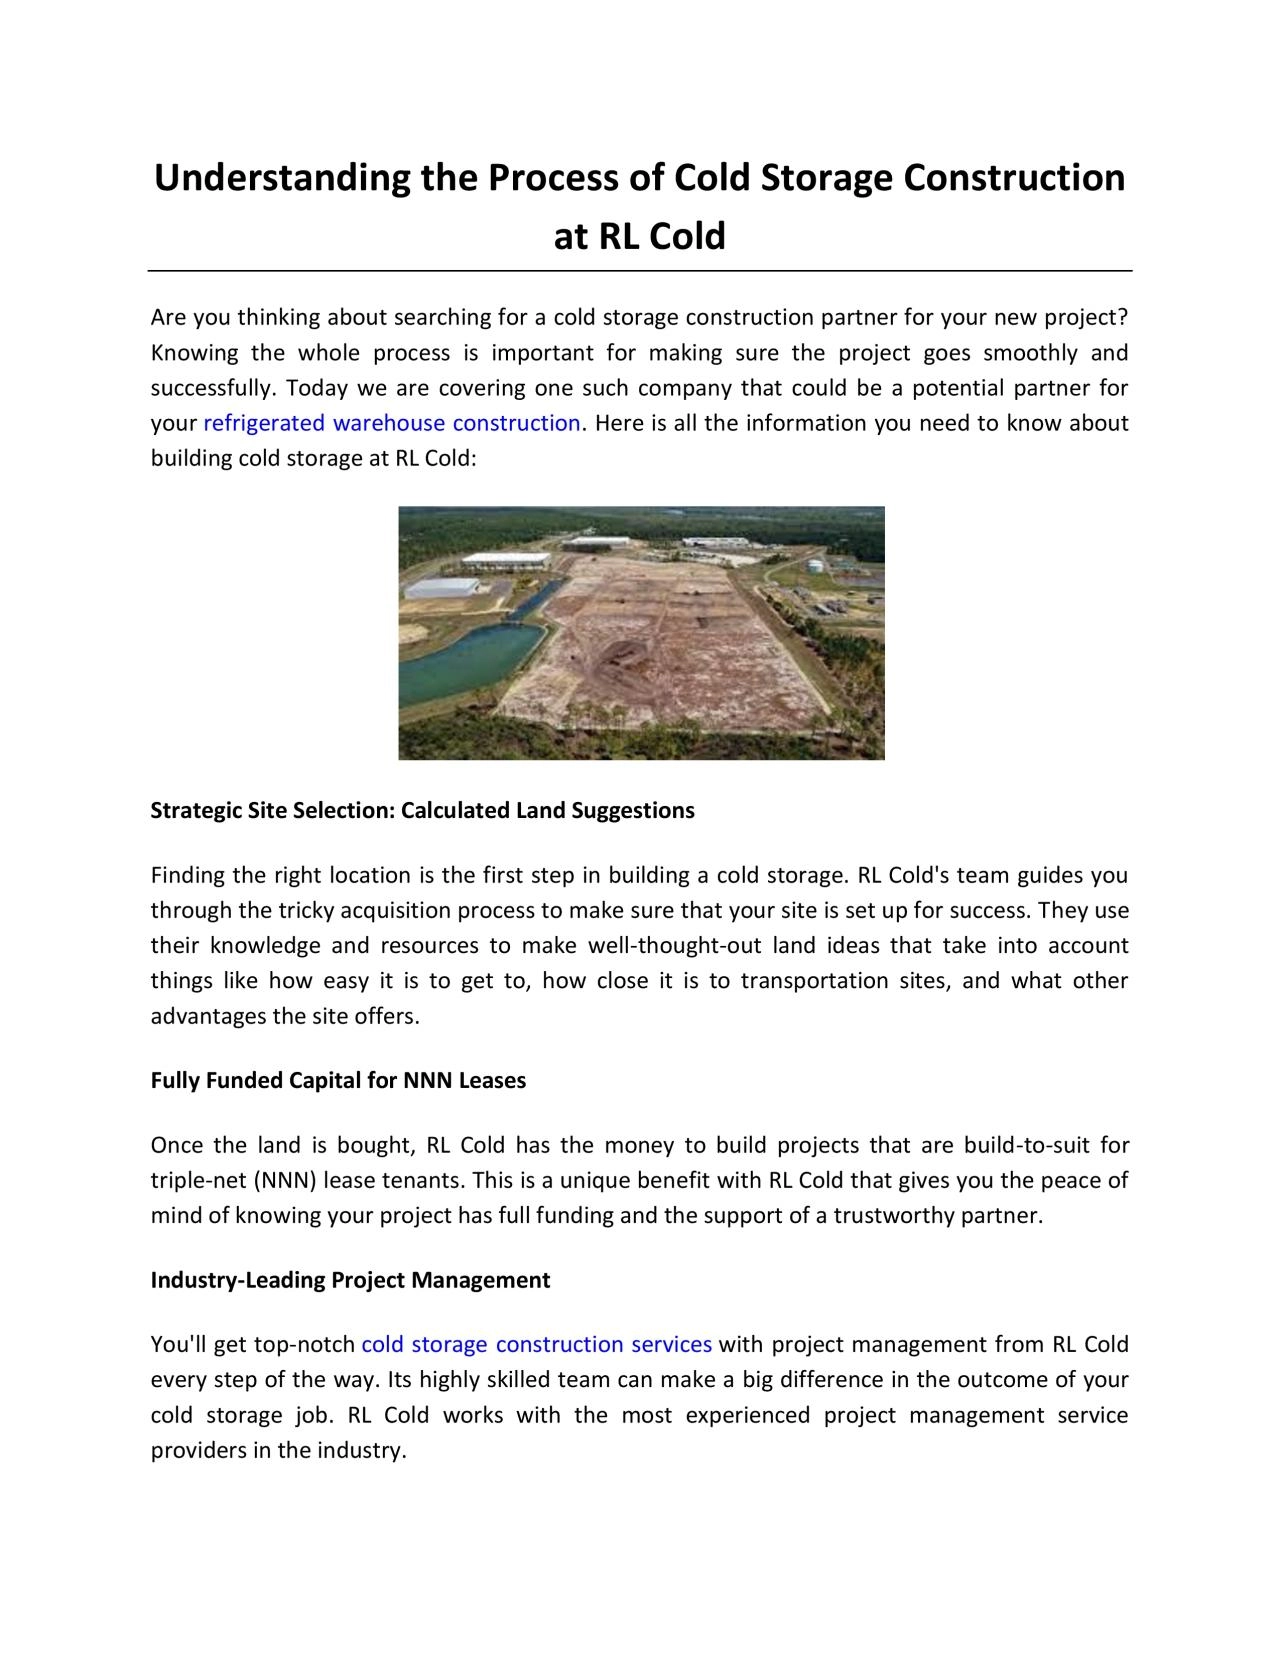 Understanding the Process of Cold Storage Construction at RL Cold